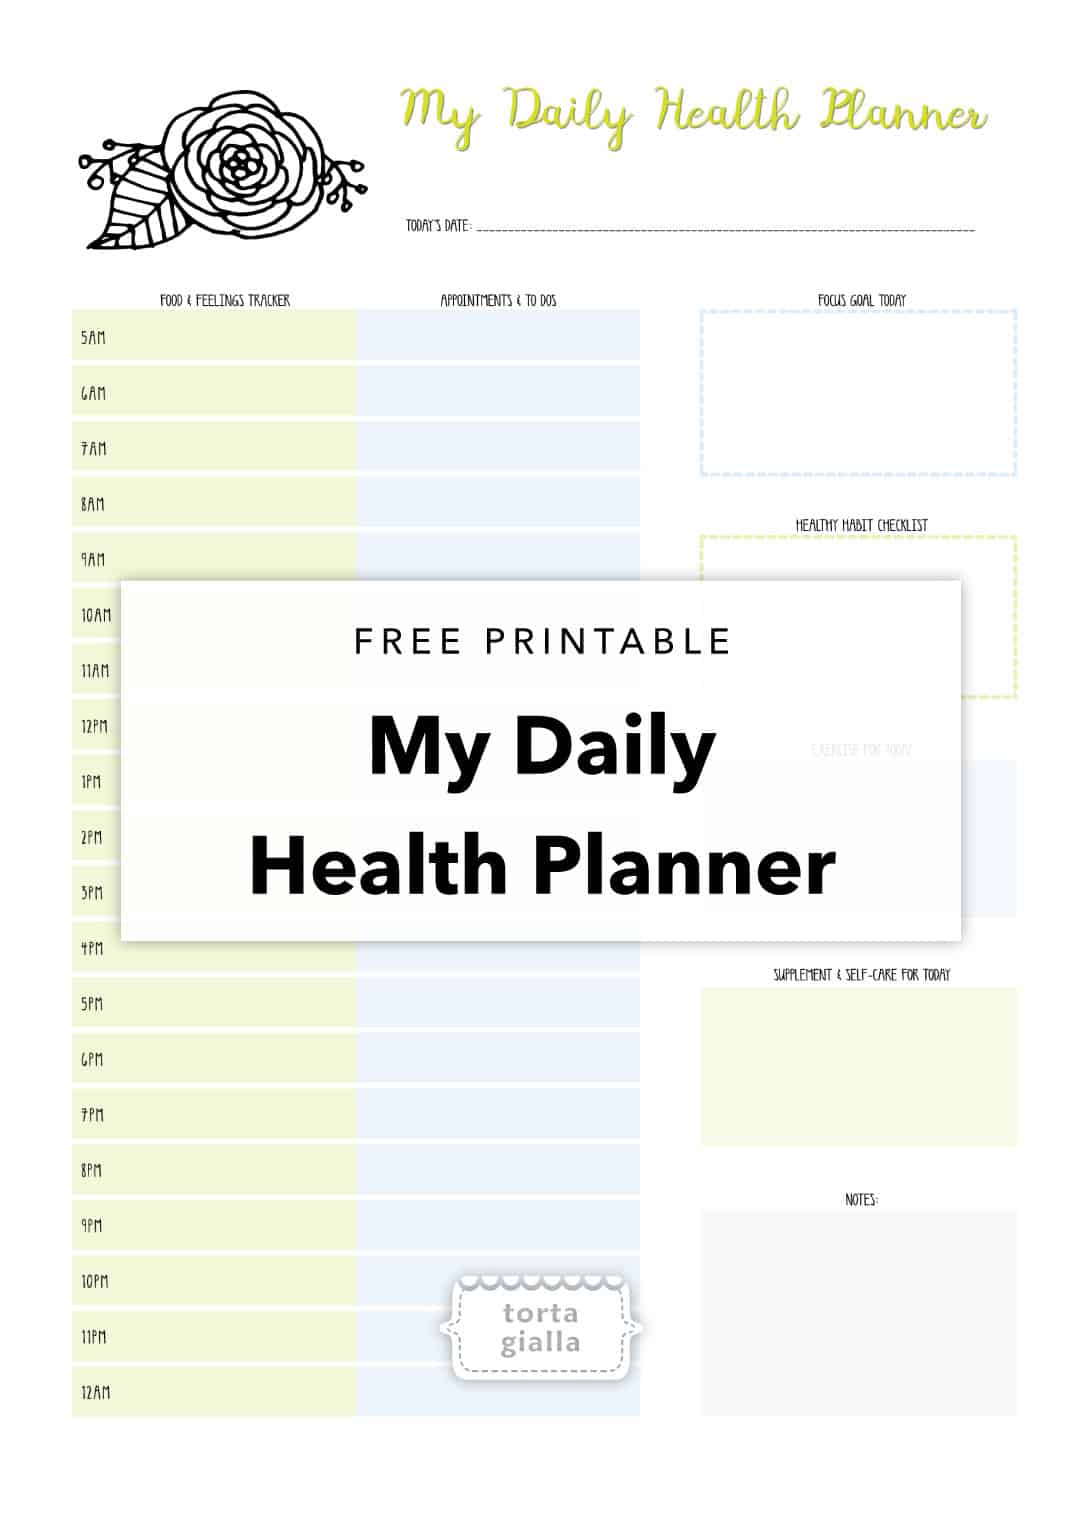 free-printable-daily-health-planner-page-tortagialla